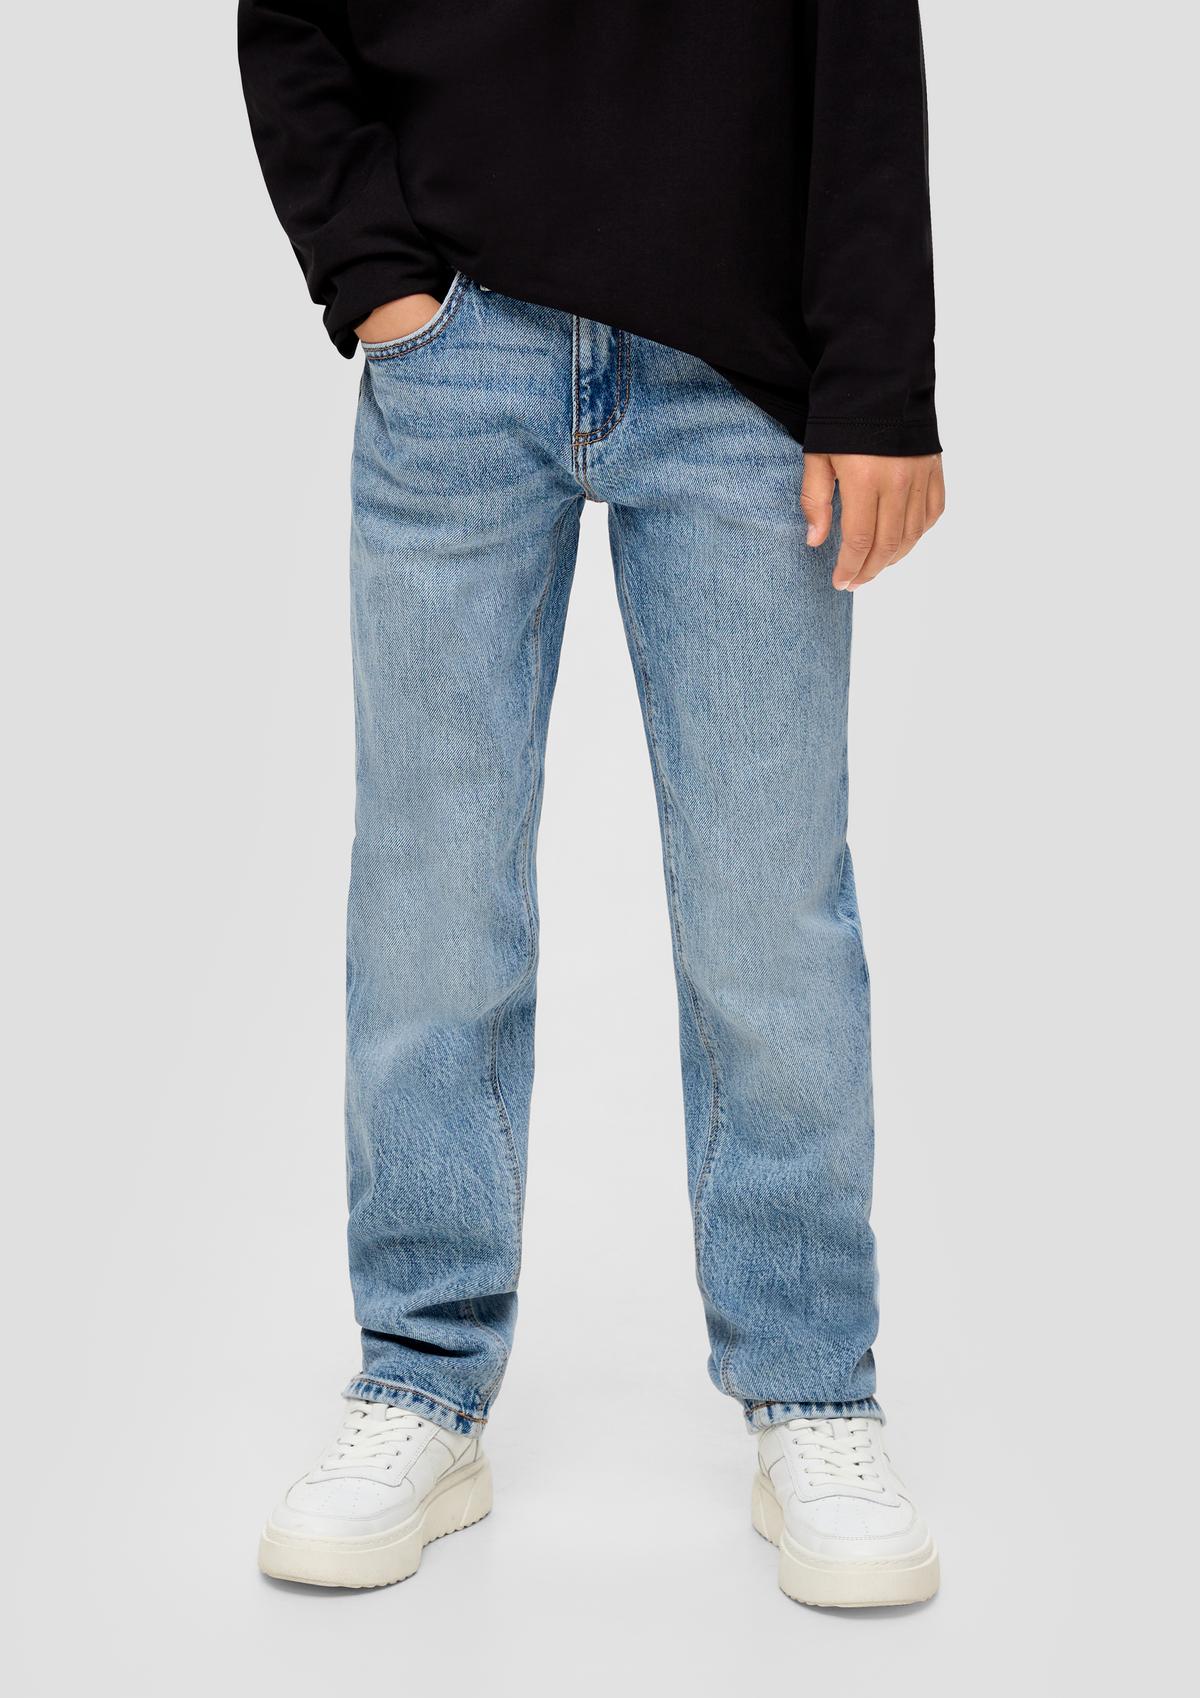 s.Oliver Jeans Pete / Regular Fit / Mid Rise / Straight Leg